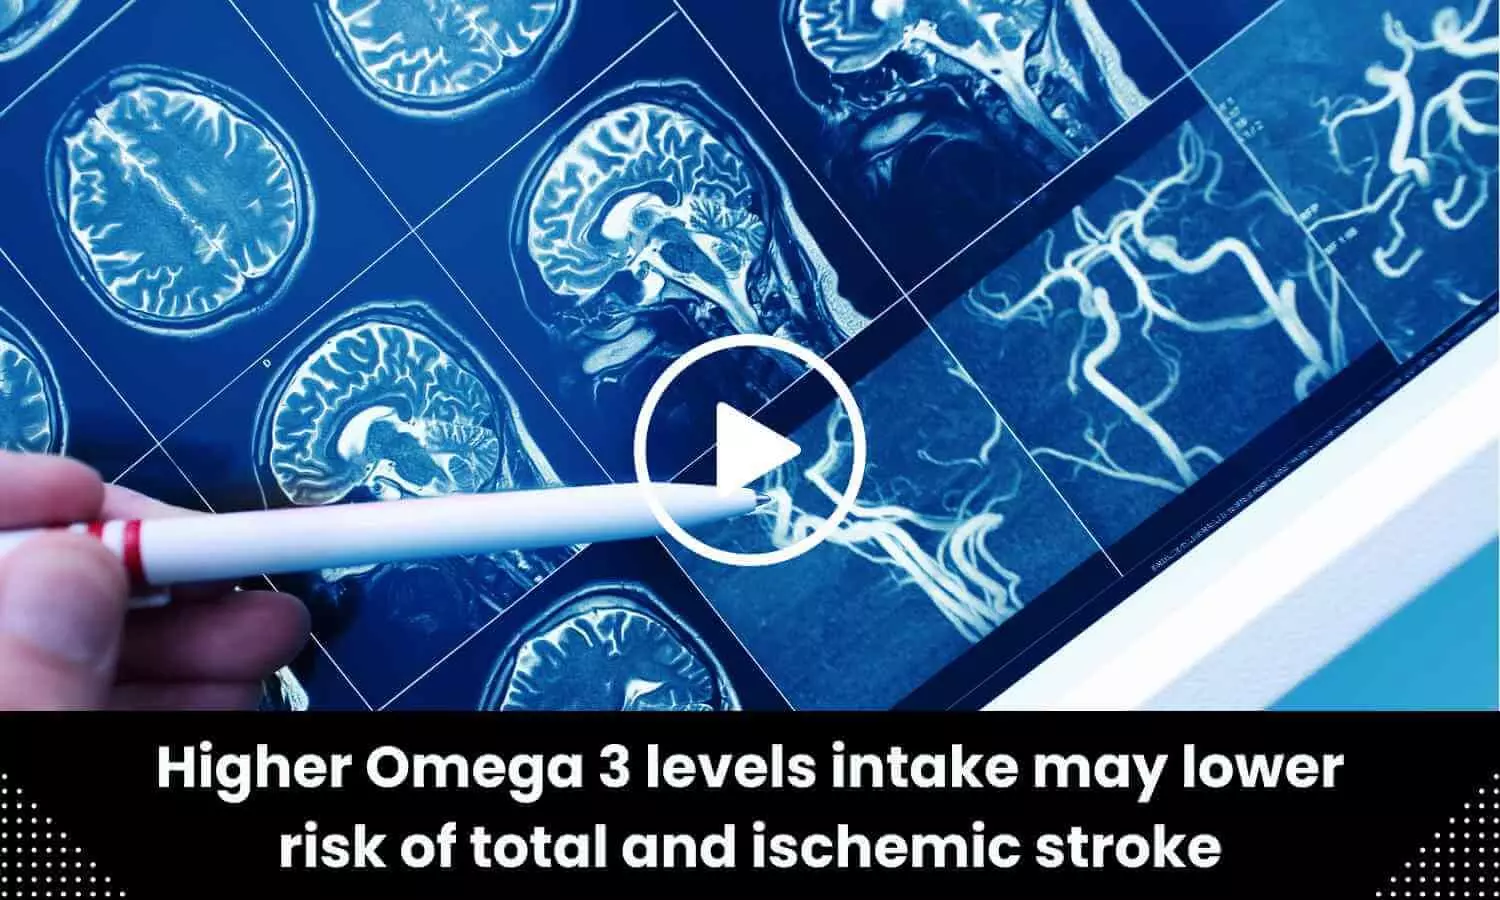 Higher Omega 3 levels intake may lower risk of total and ischemic stroke